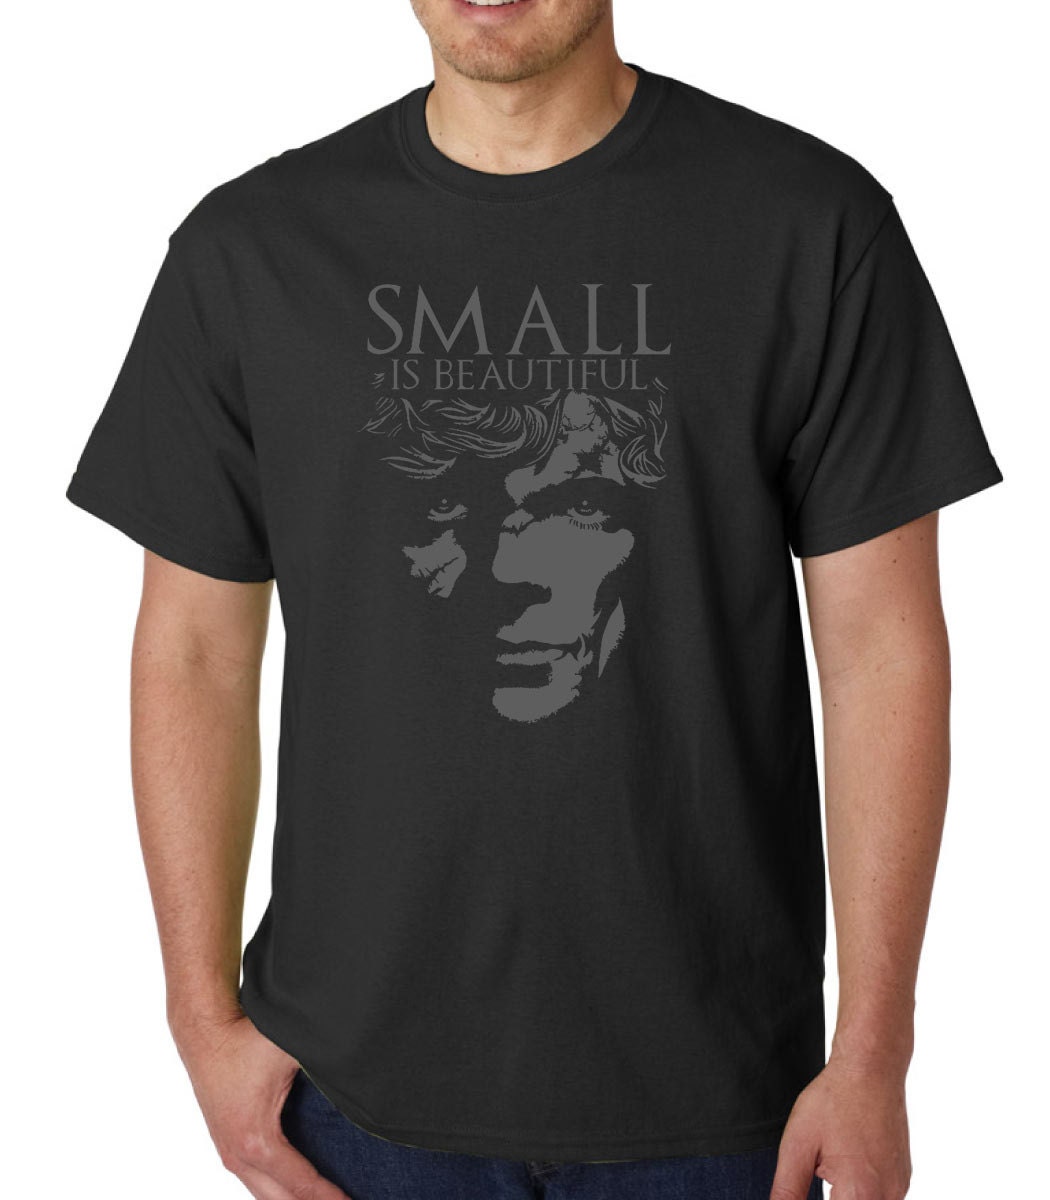 Small Is Beautiful (Tyrion) t-shirt